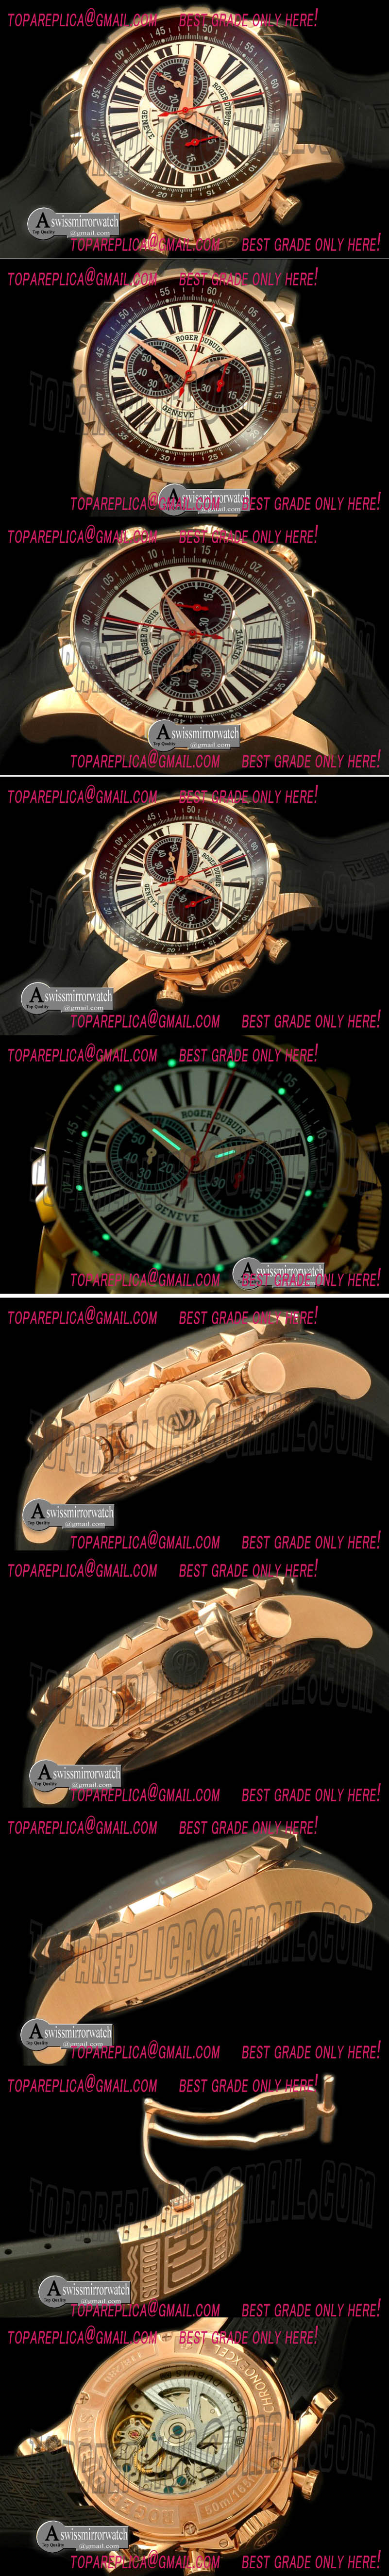 Replica Roger Dubuis Watches